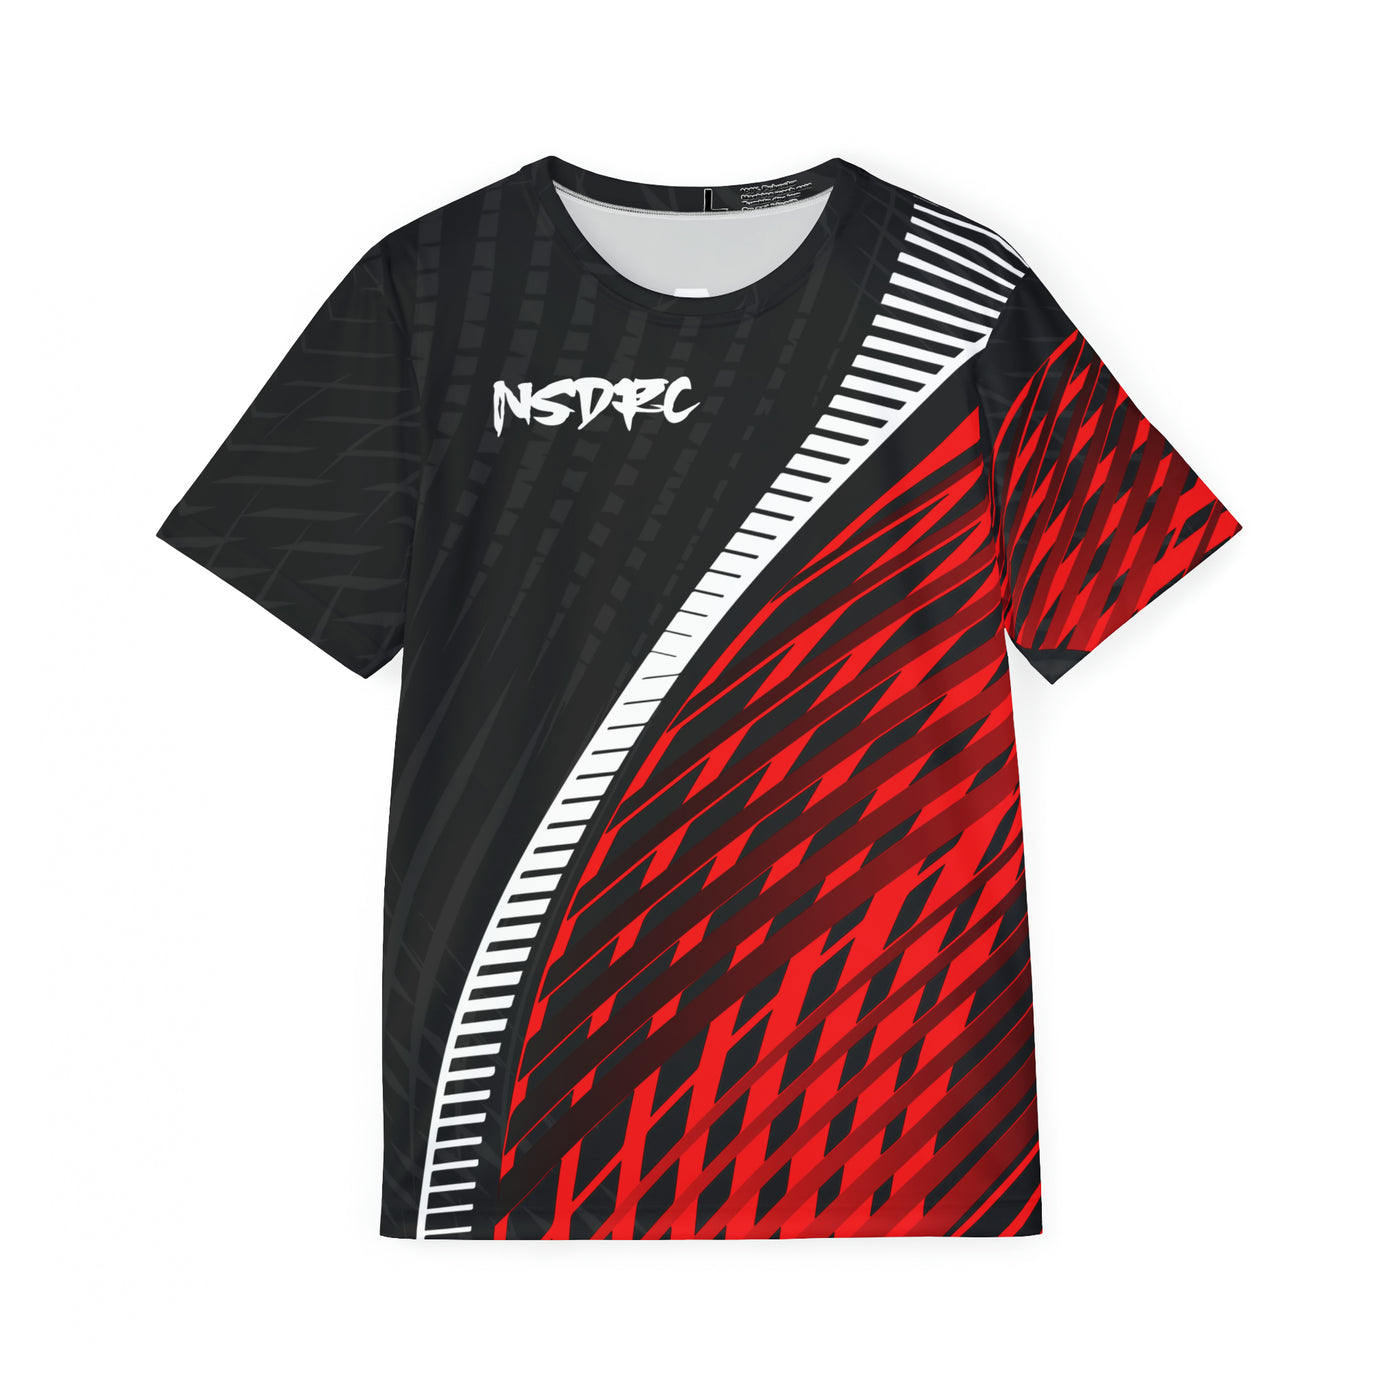 Men's Sports Jersey Red pattern Buggy